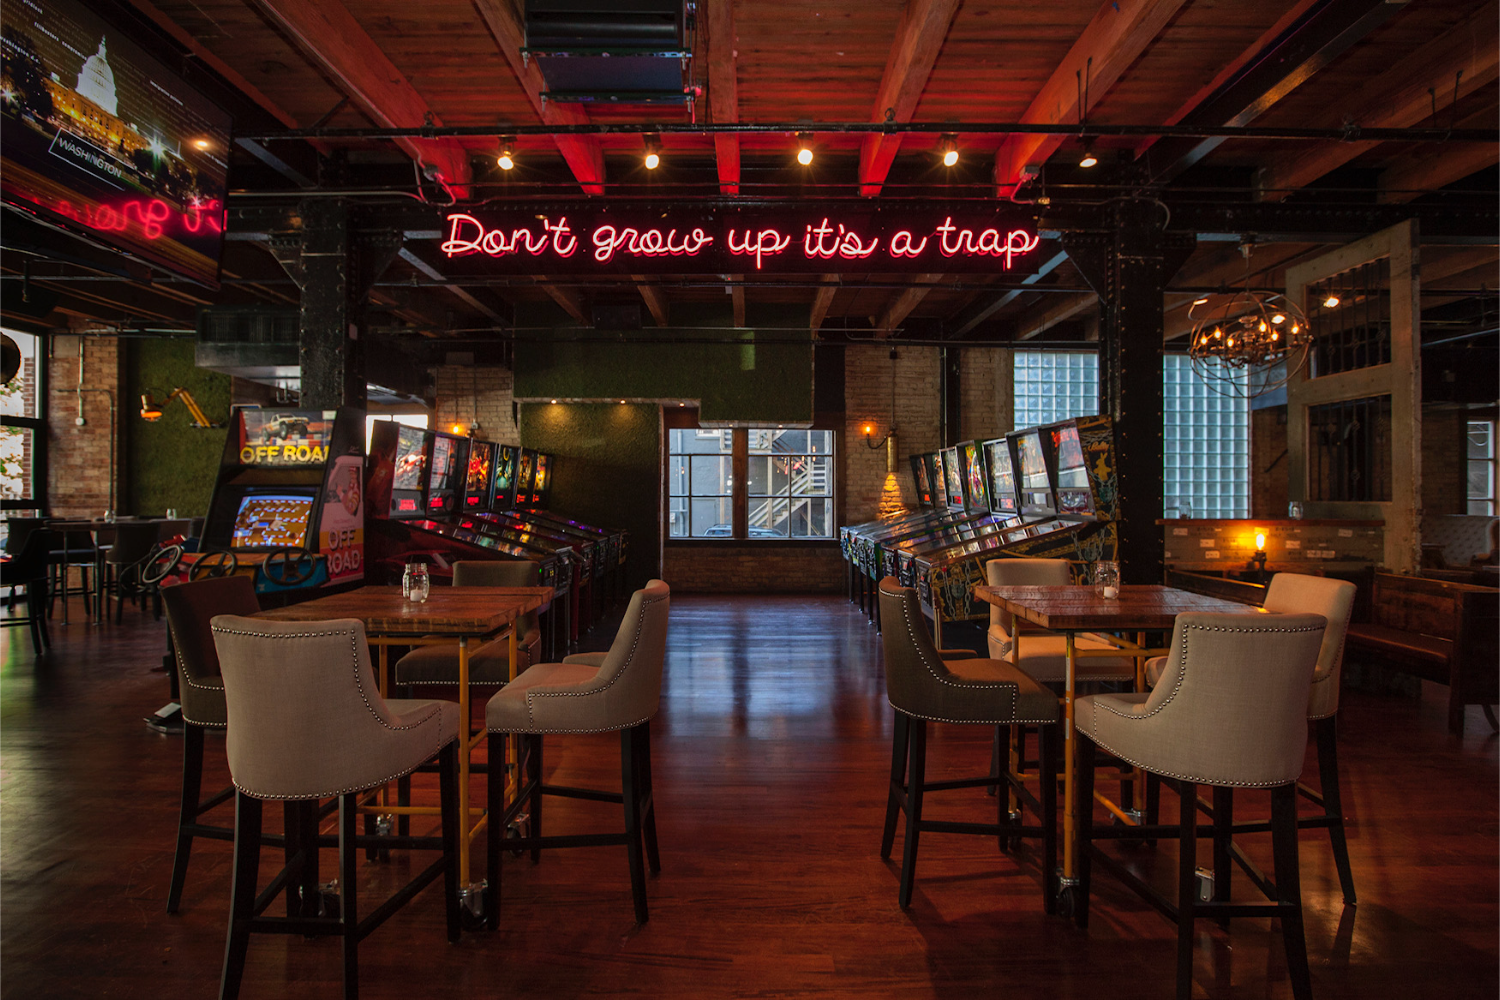 arcade games, tables with chairs, neon red sign that reads "don't grow up, it's a trap"